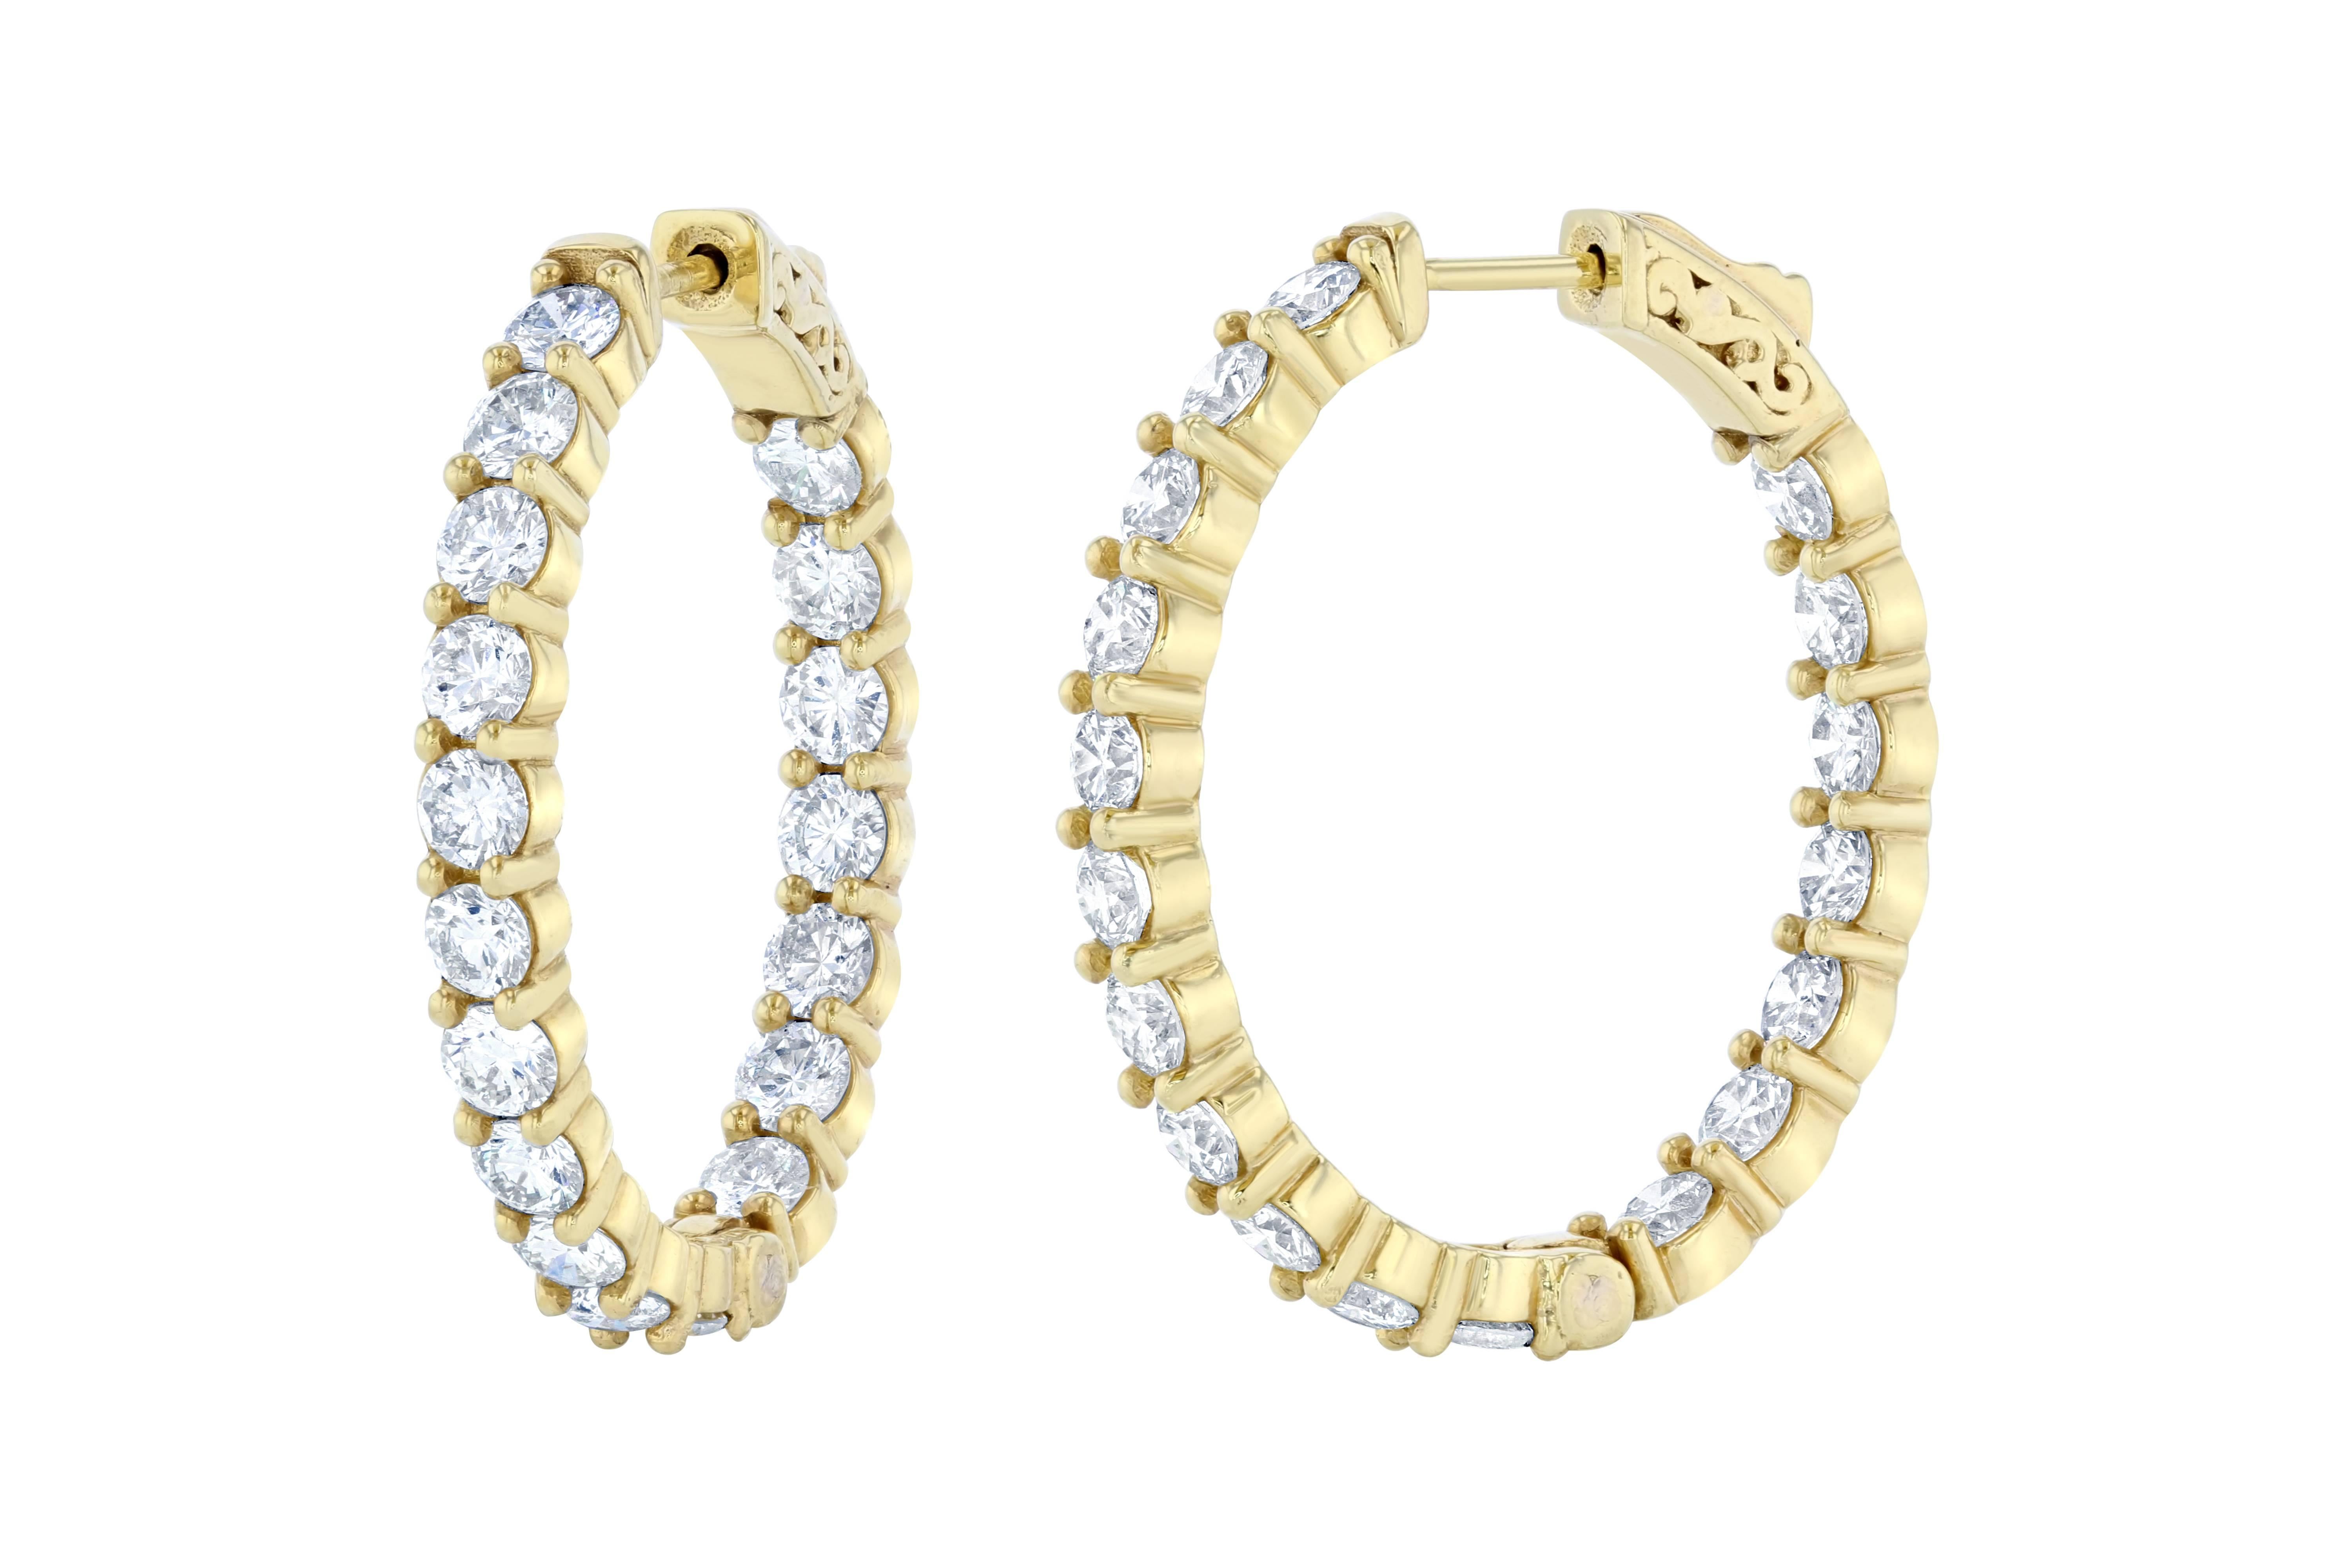 These stunning diamond hoops have diamonds set inside and out to give the piece symmetry and sparkle from all angles.  There are 36 Round Cut Diamonds that weigh 6.75 carats and they are made in 14K Yellow Gold and weigh approximately 13.4 grams.